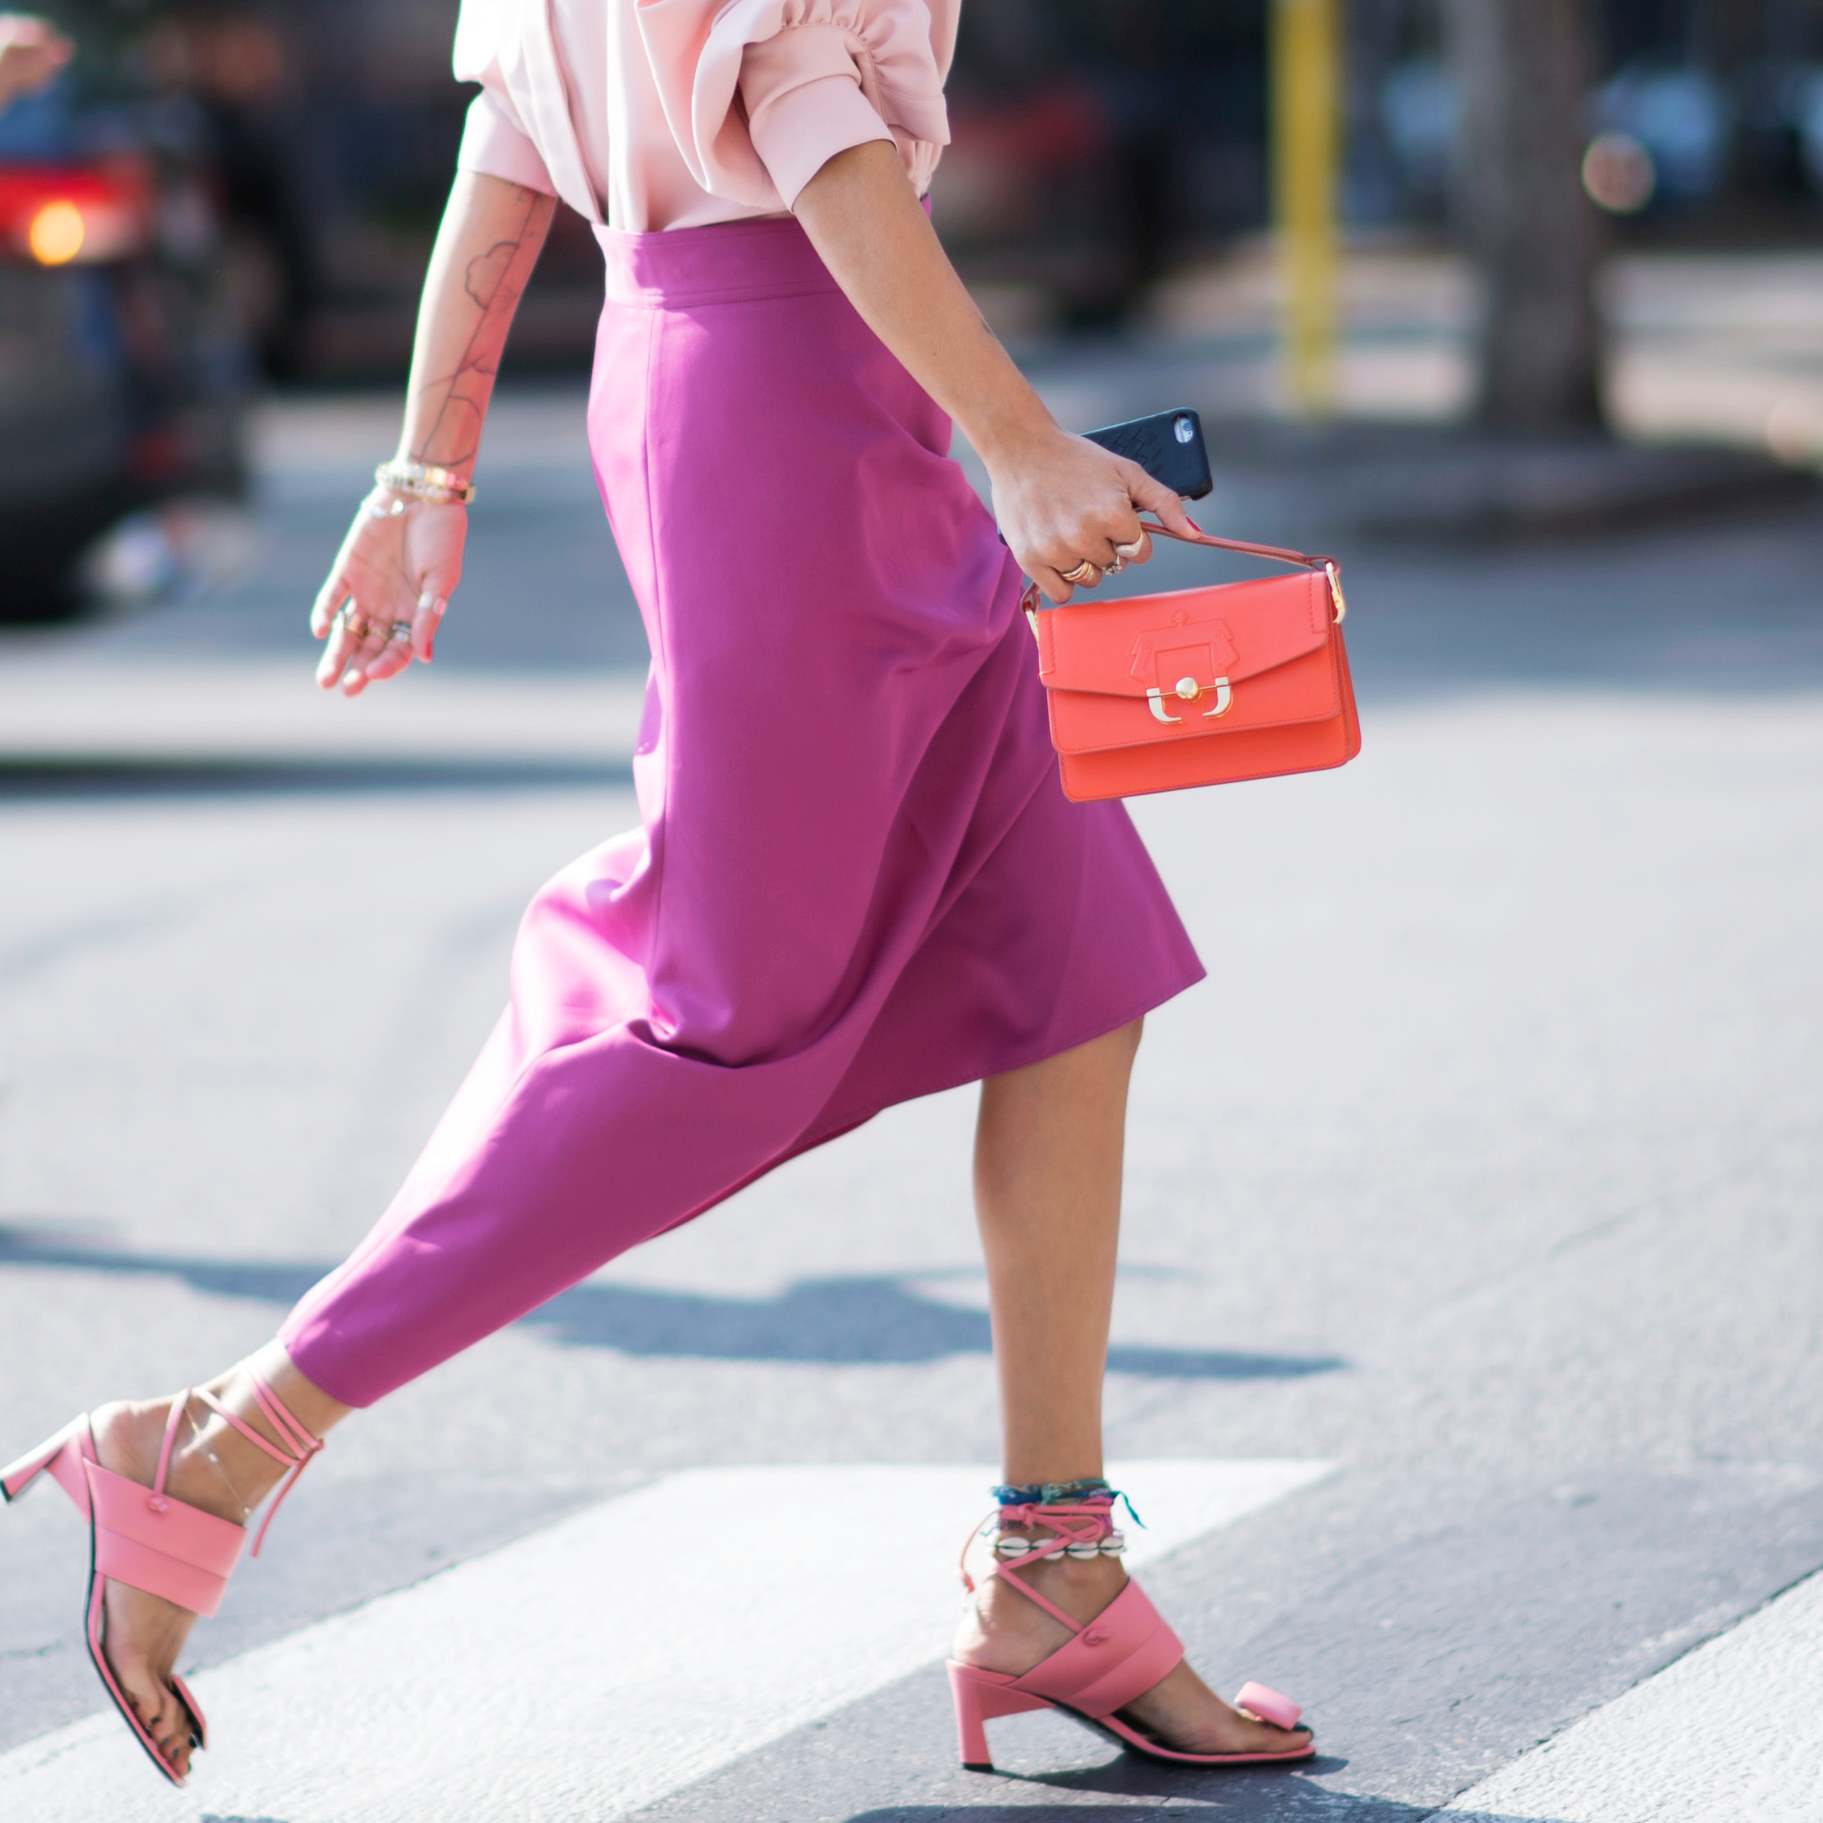 How to Wear Head-to-Toe Pink